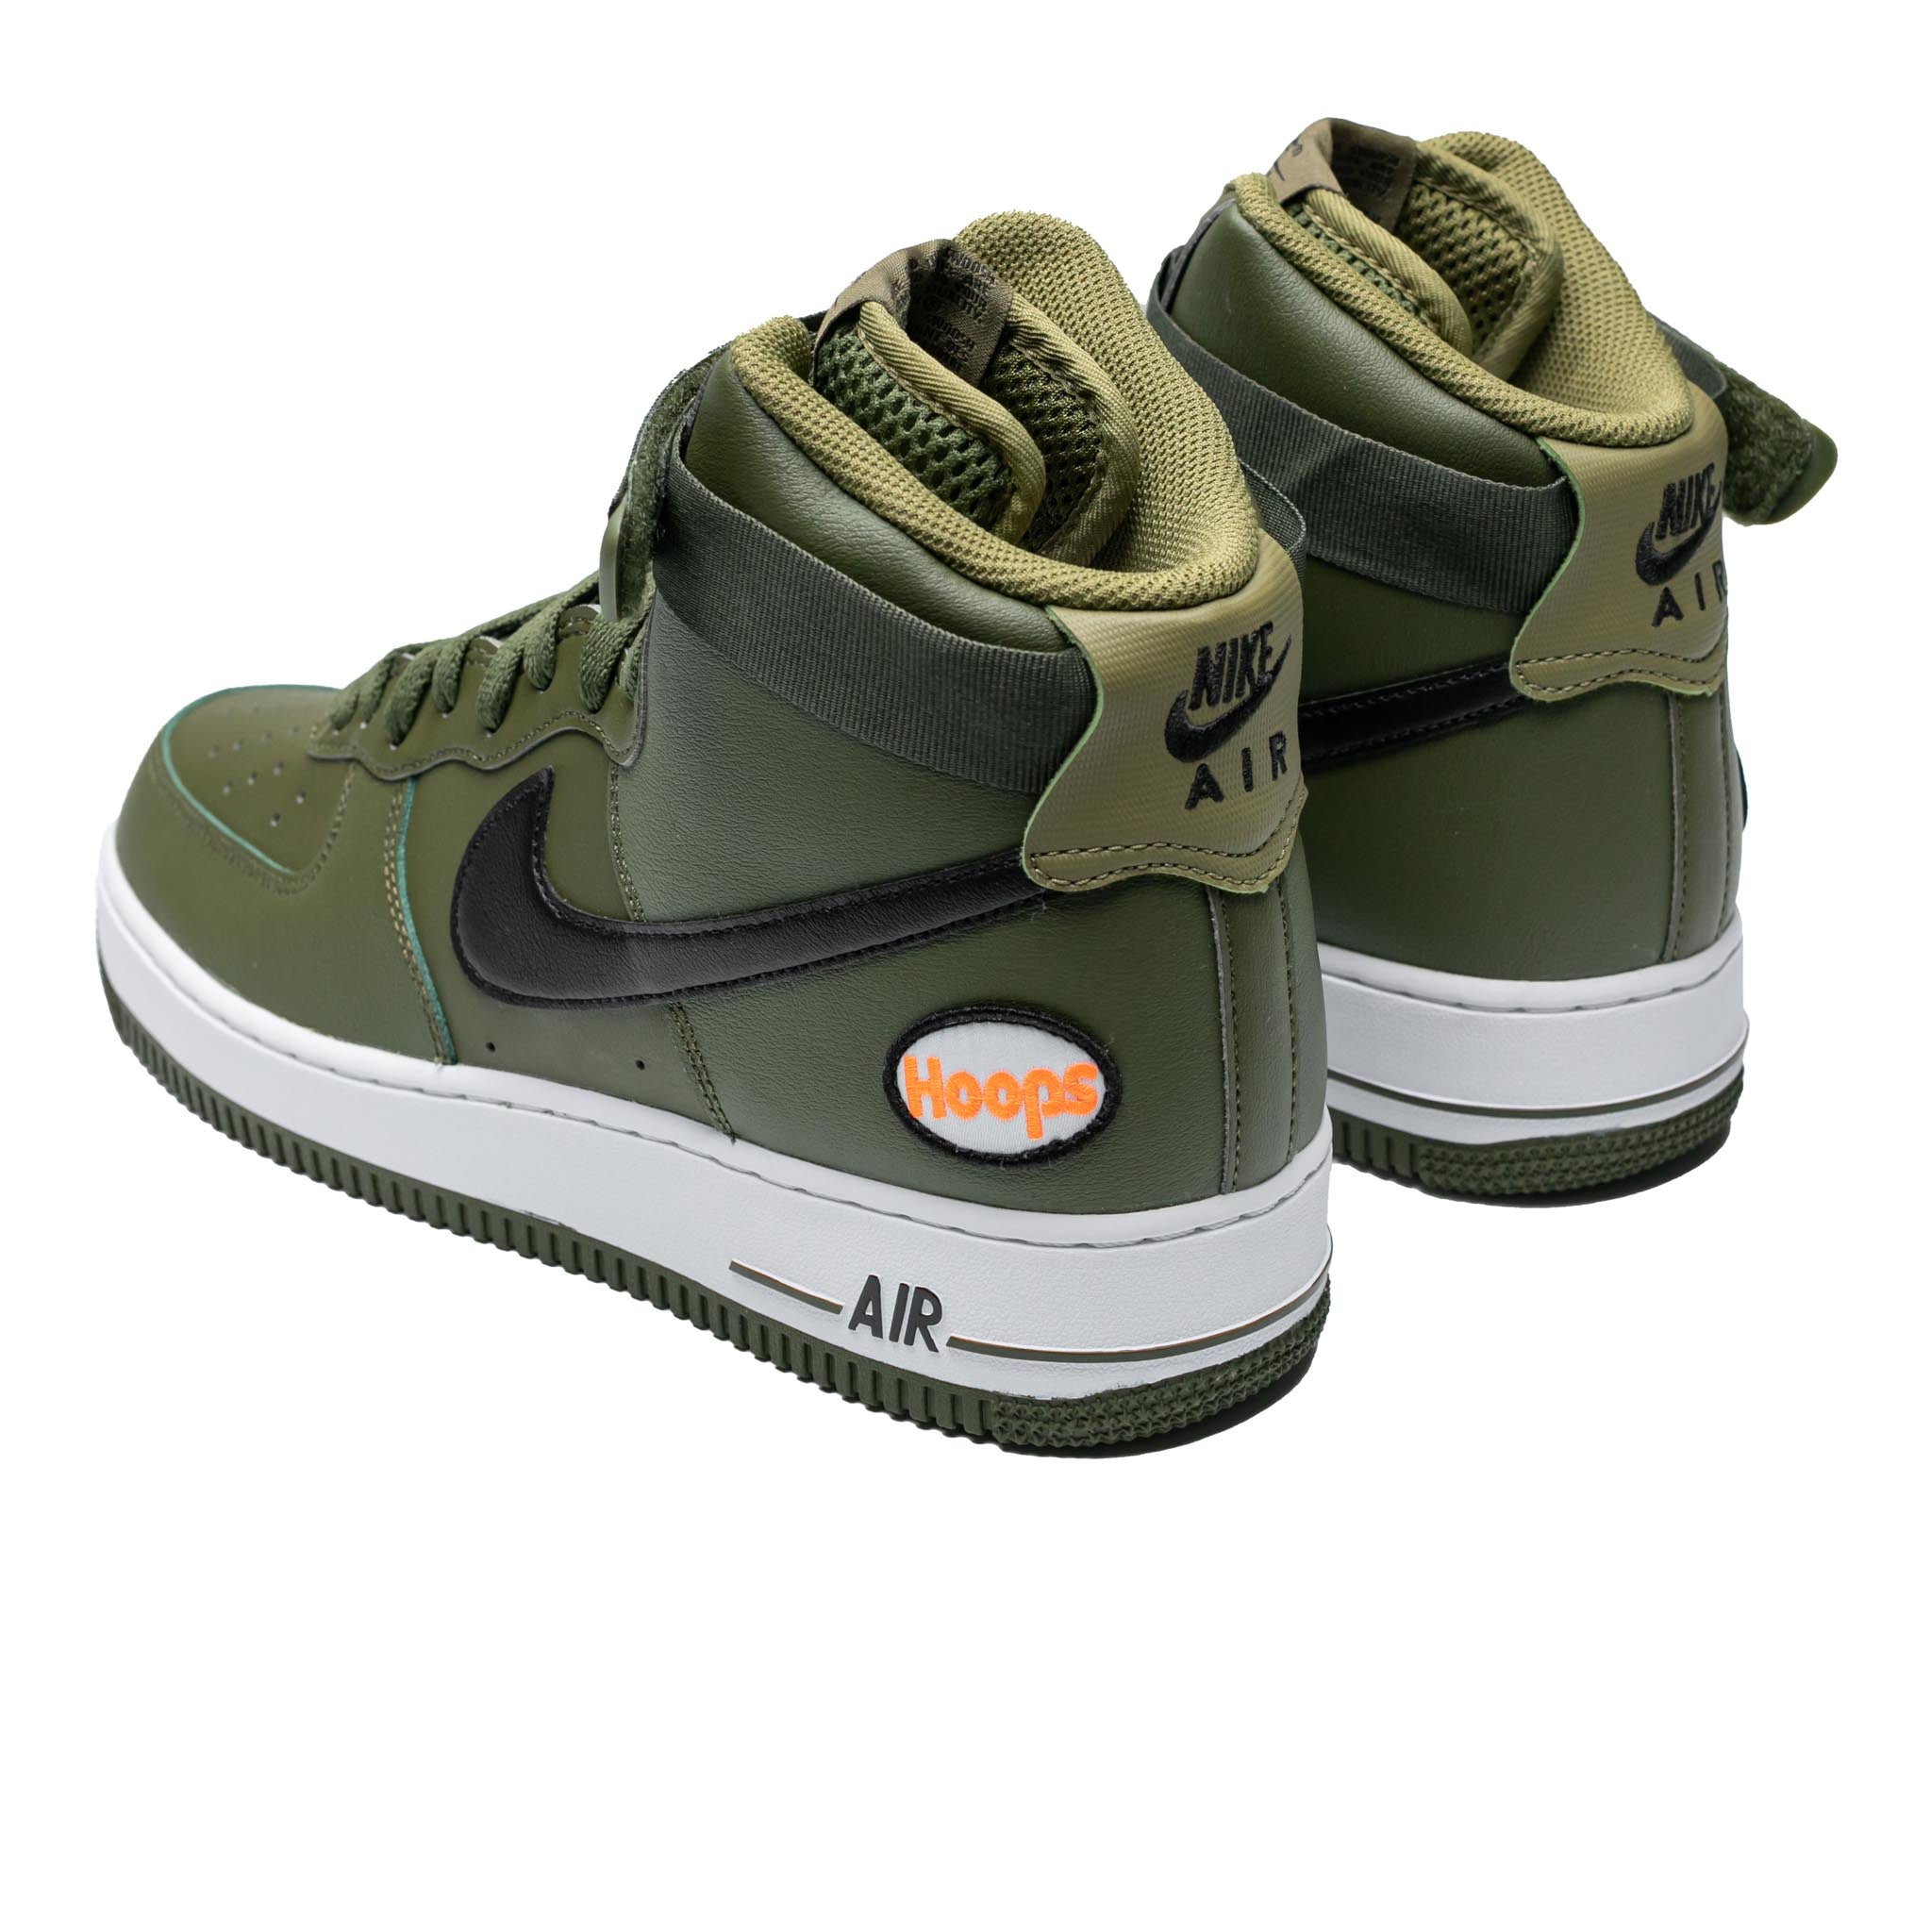 Nike Air Force 1 High Olive (Hoops Pack) DH7453-300